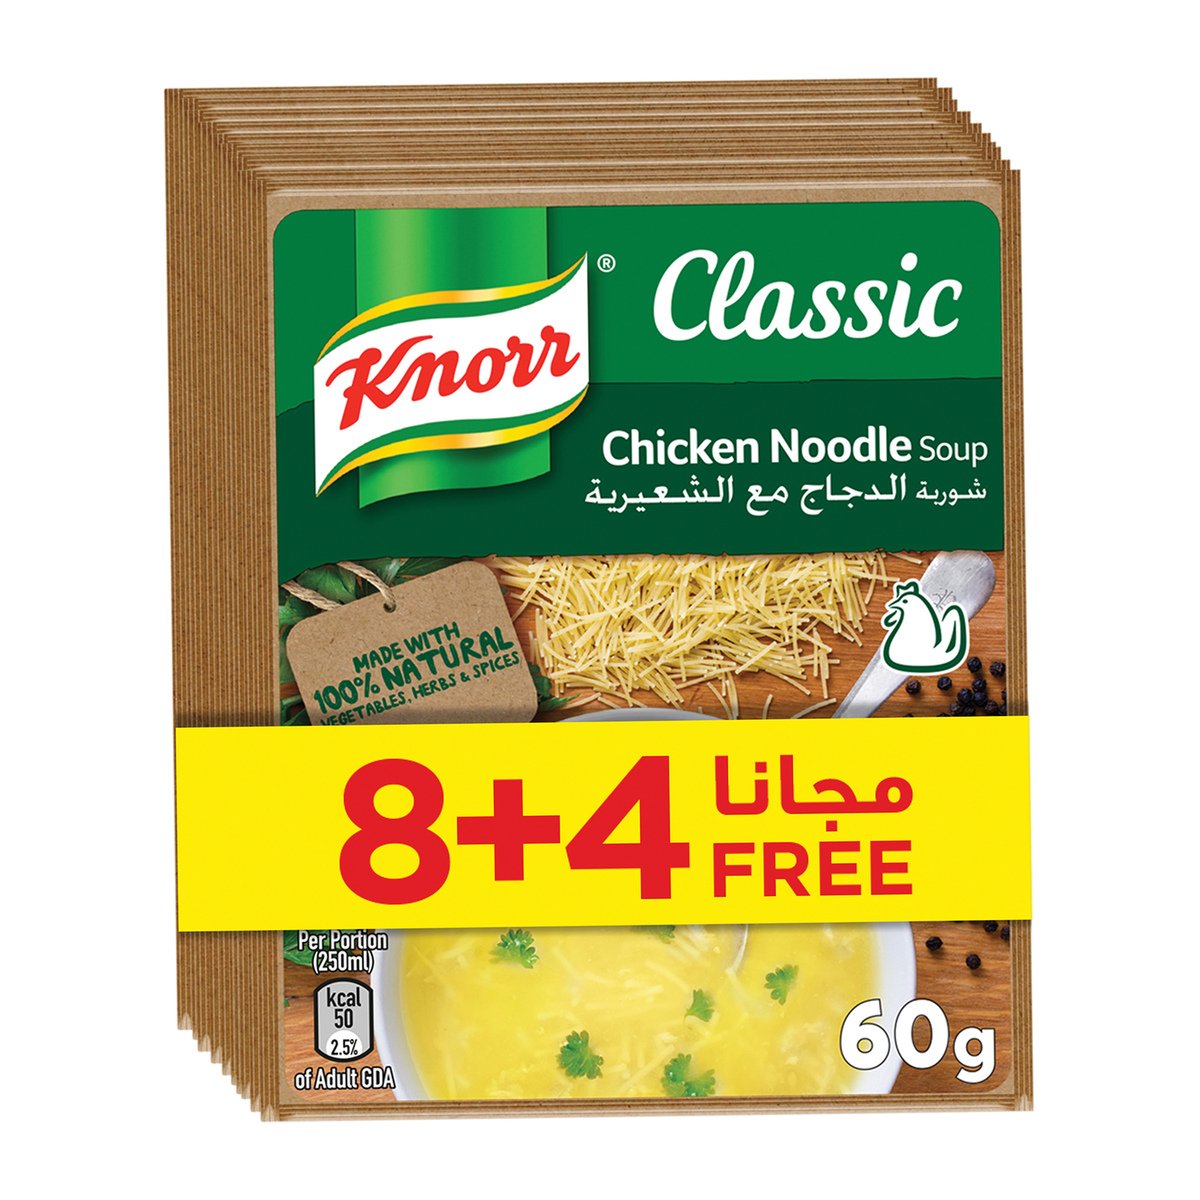 Knorr Classic Chicken Noodle Soup 60 g 8+4